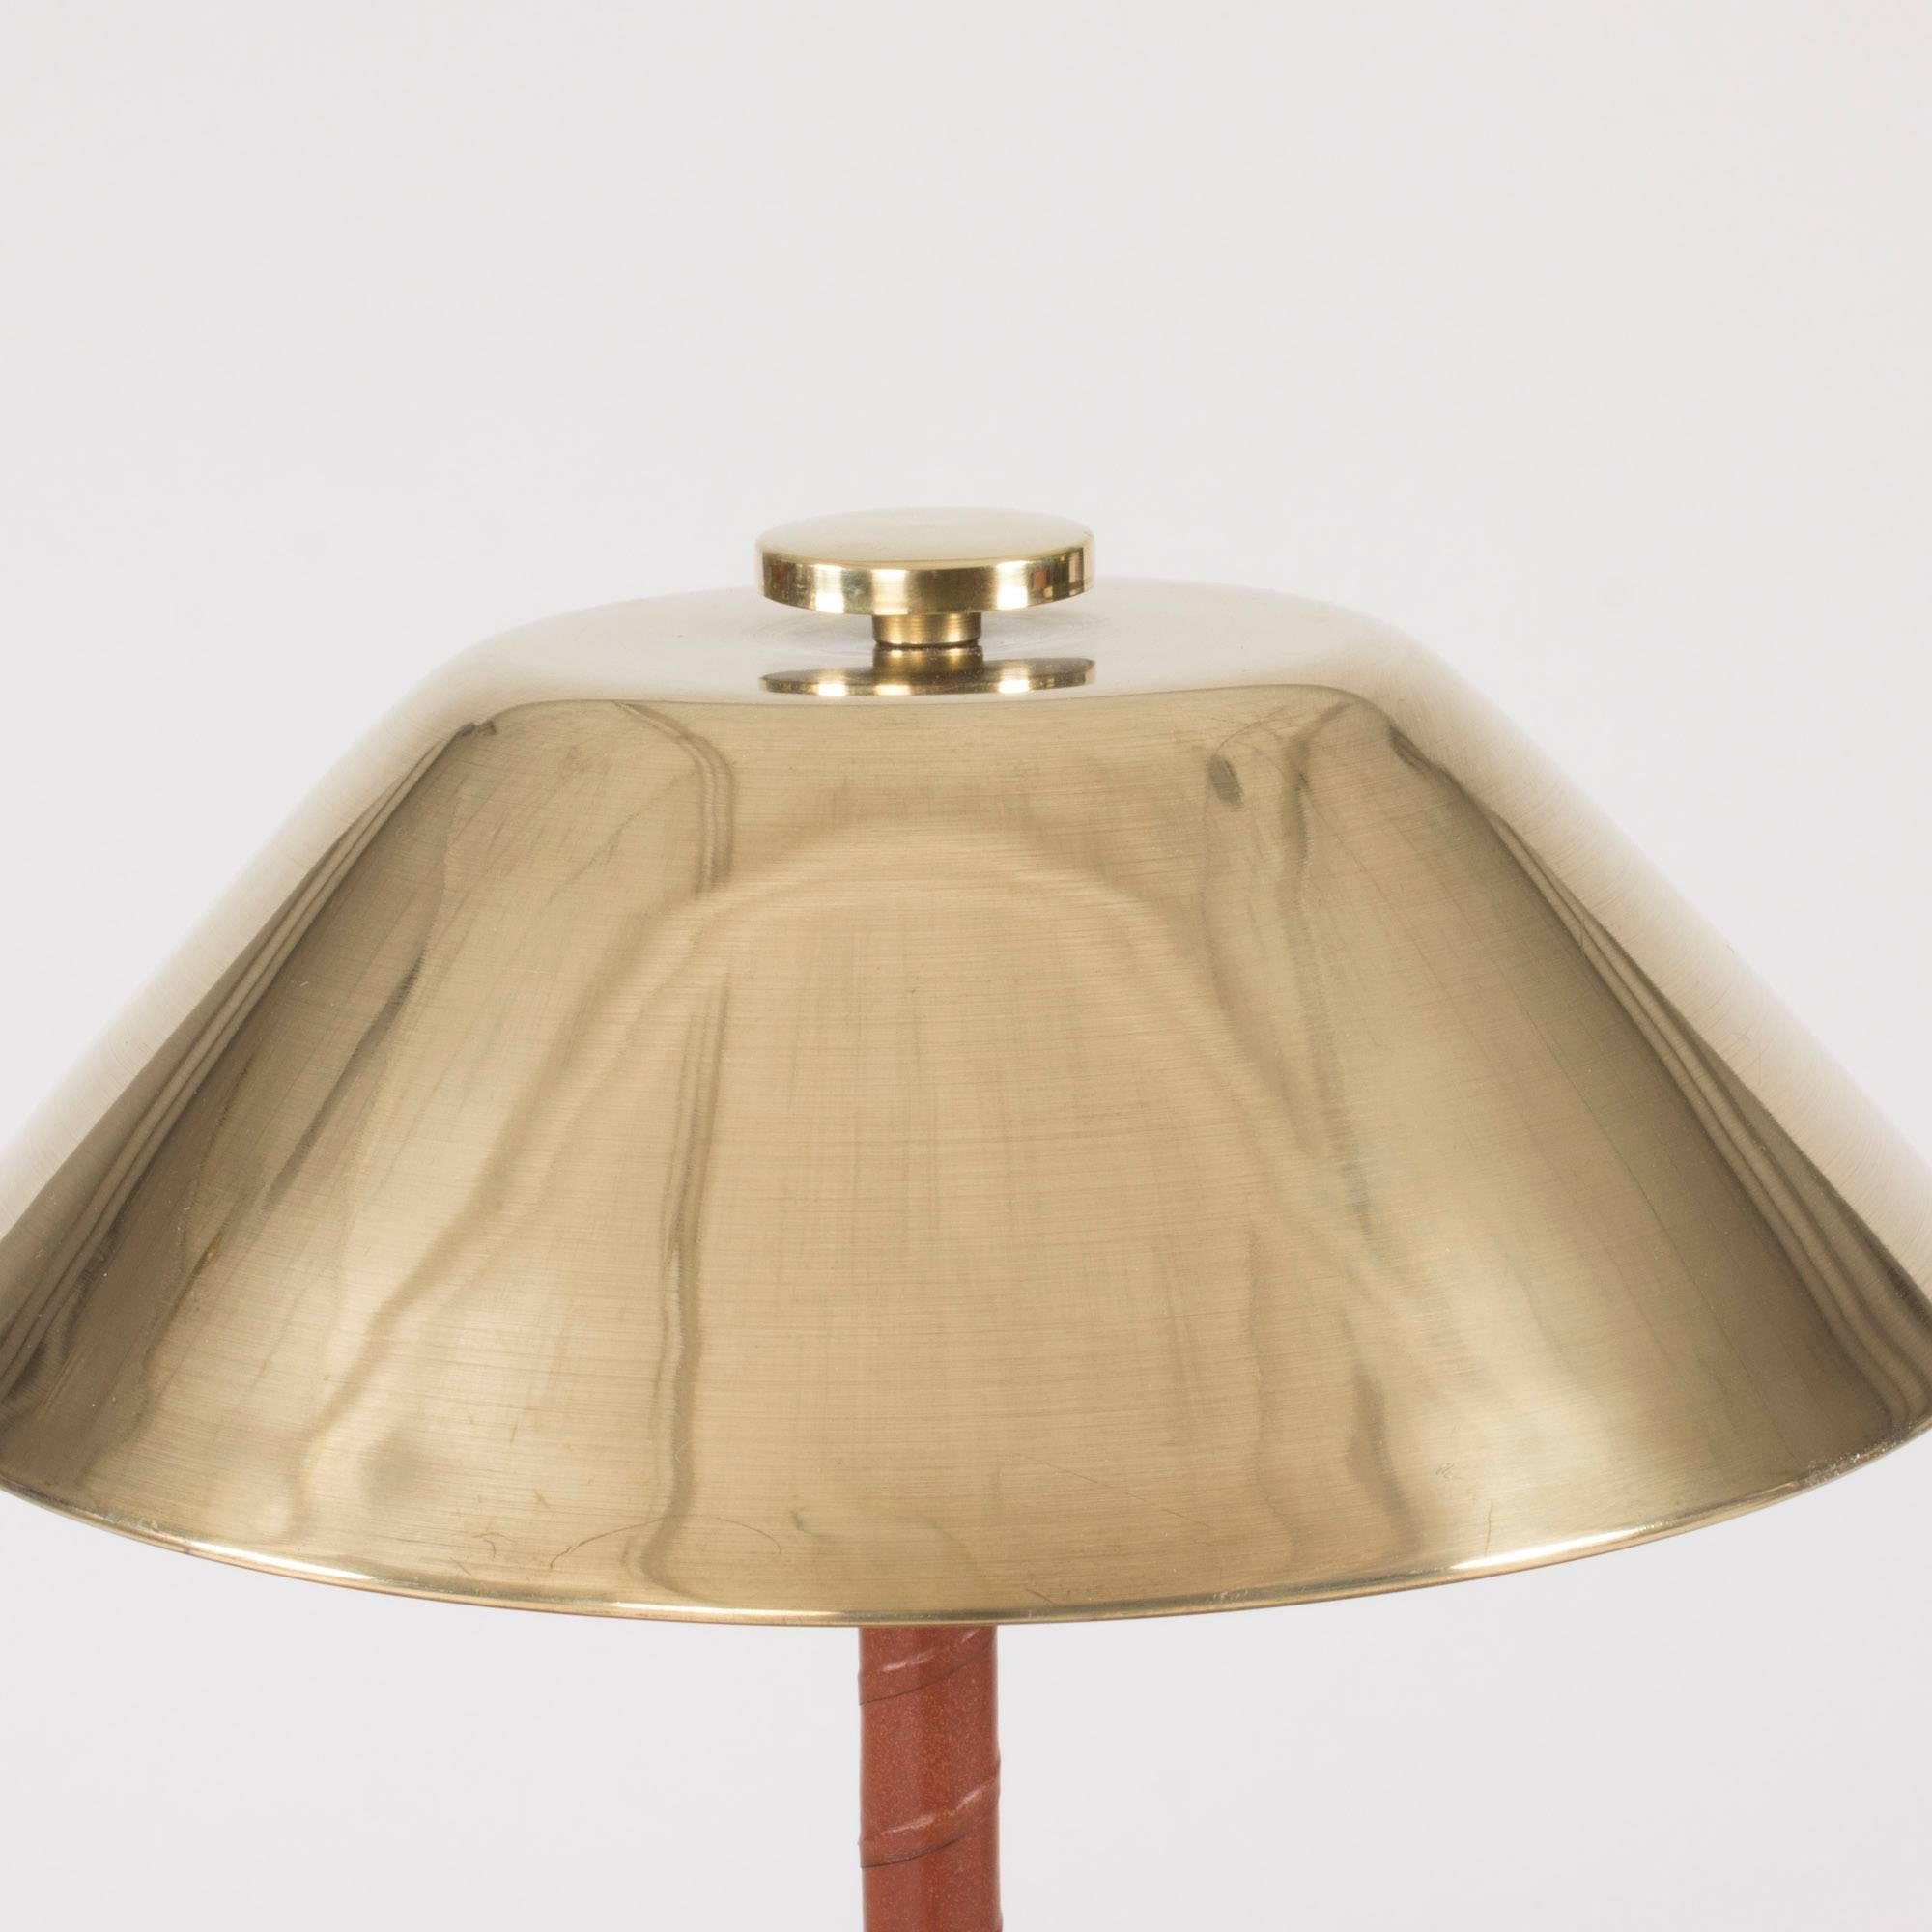 Very elegant table lamp by Einar Bäckström, made of brass with an appealing, disc decoration on top. Handle wound with brown leather.